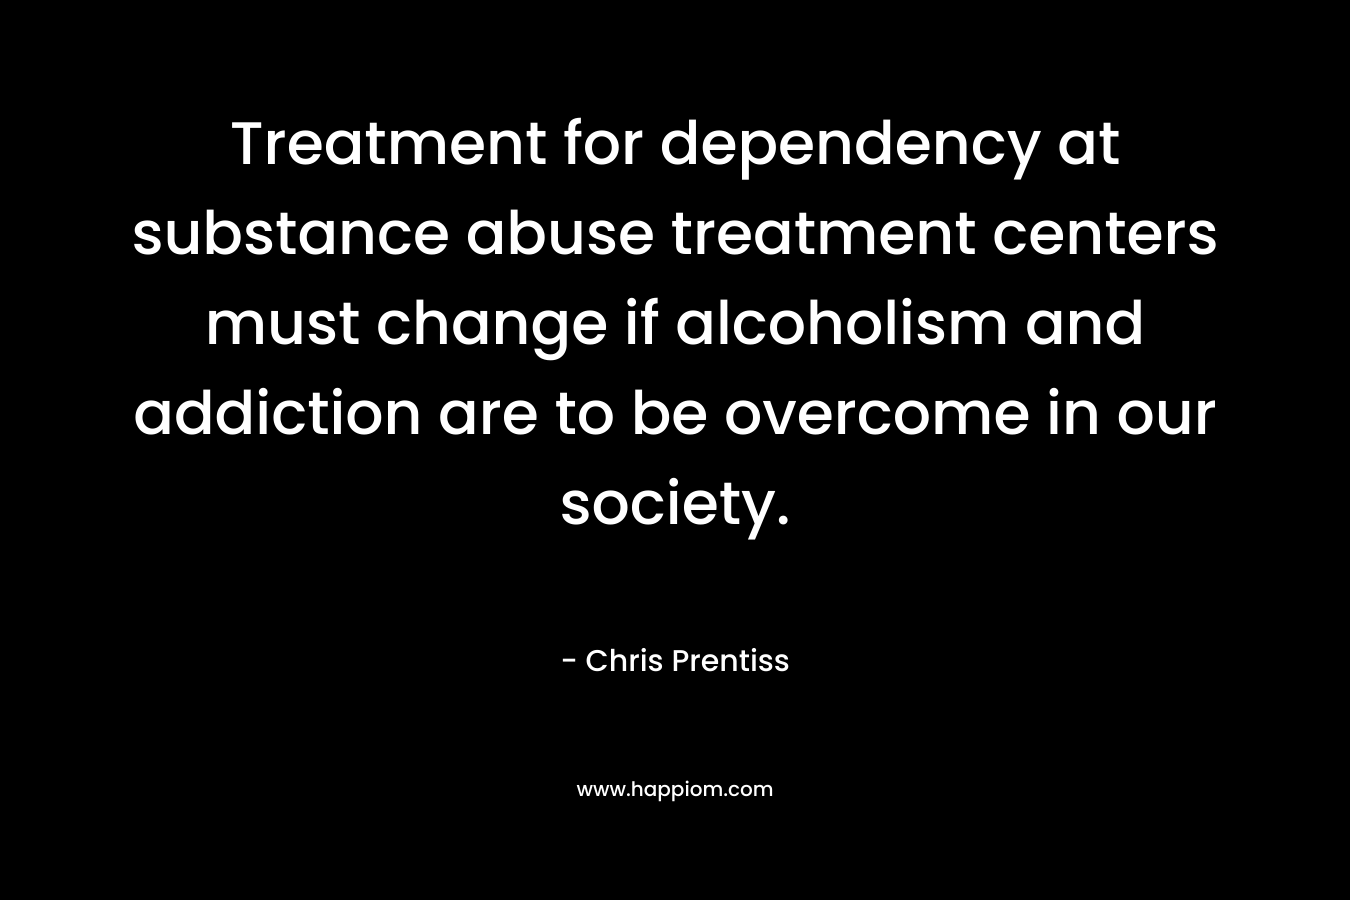 Treatment for dependency at substance abuse treatment centers must change if alcoholism and addiction are to be overcome in our society.